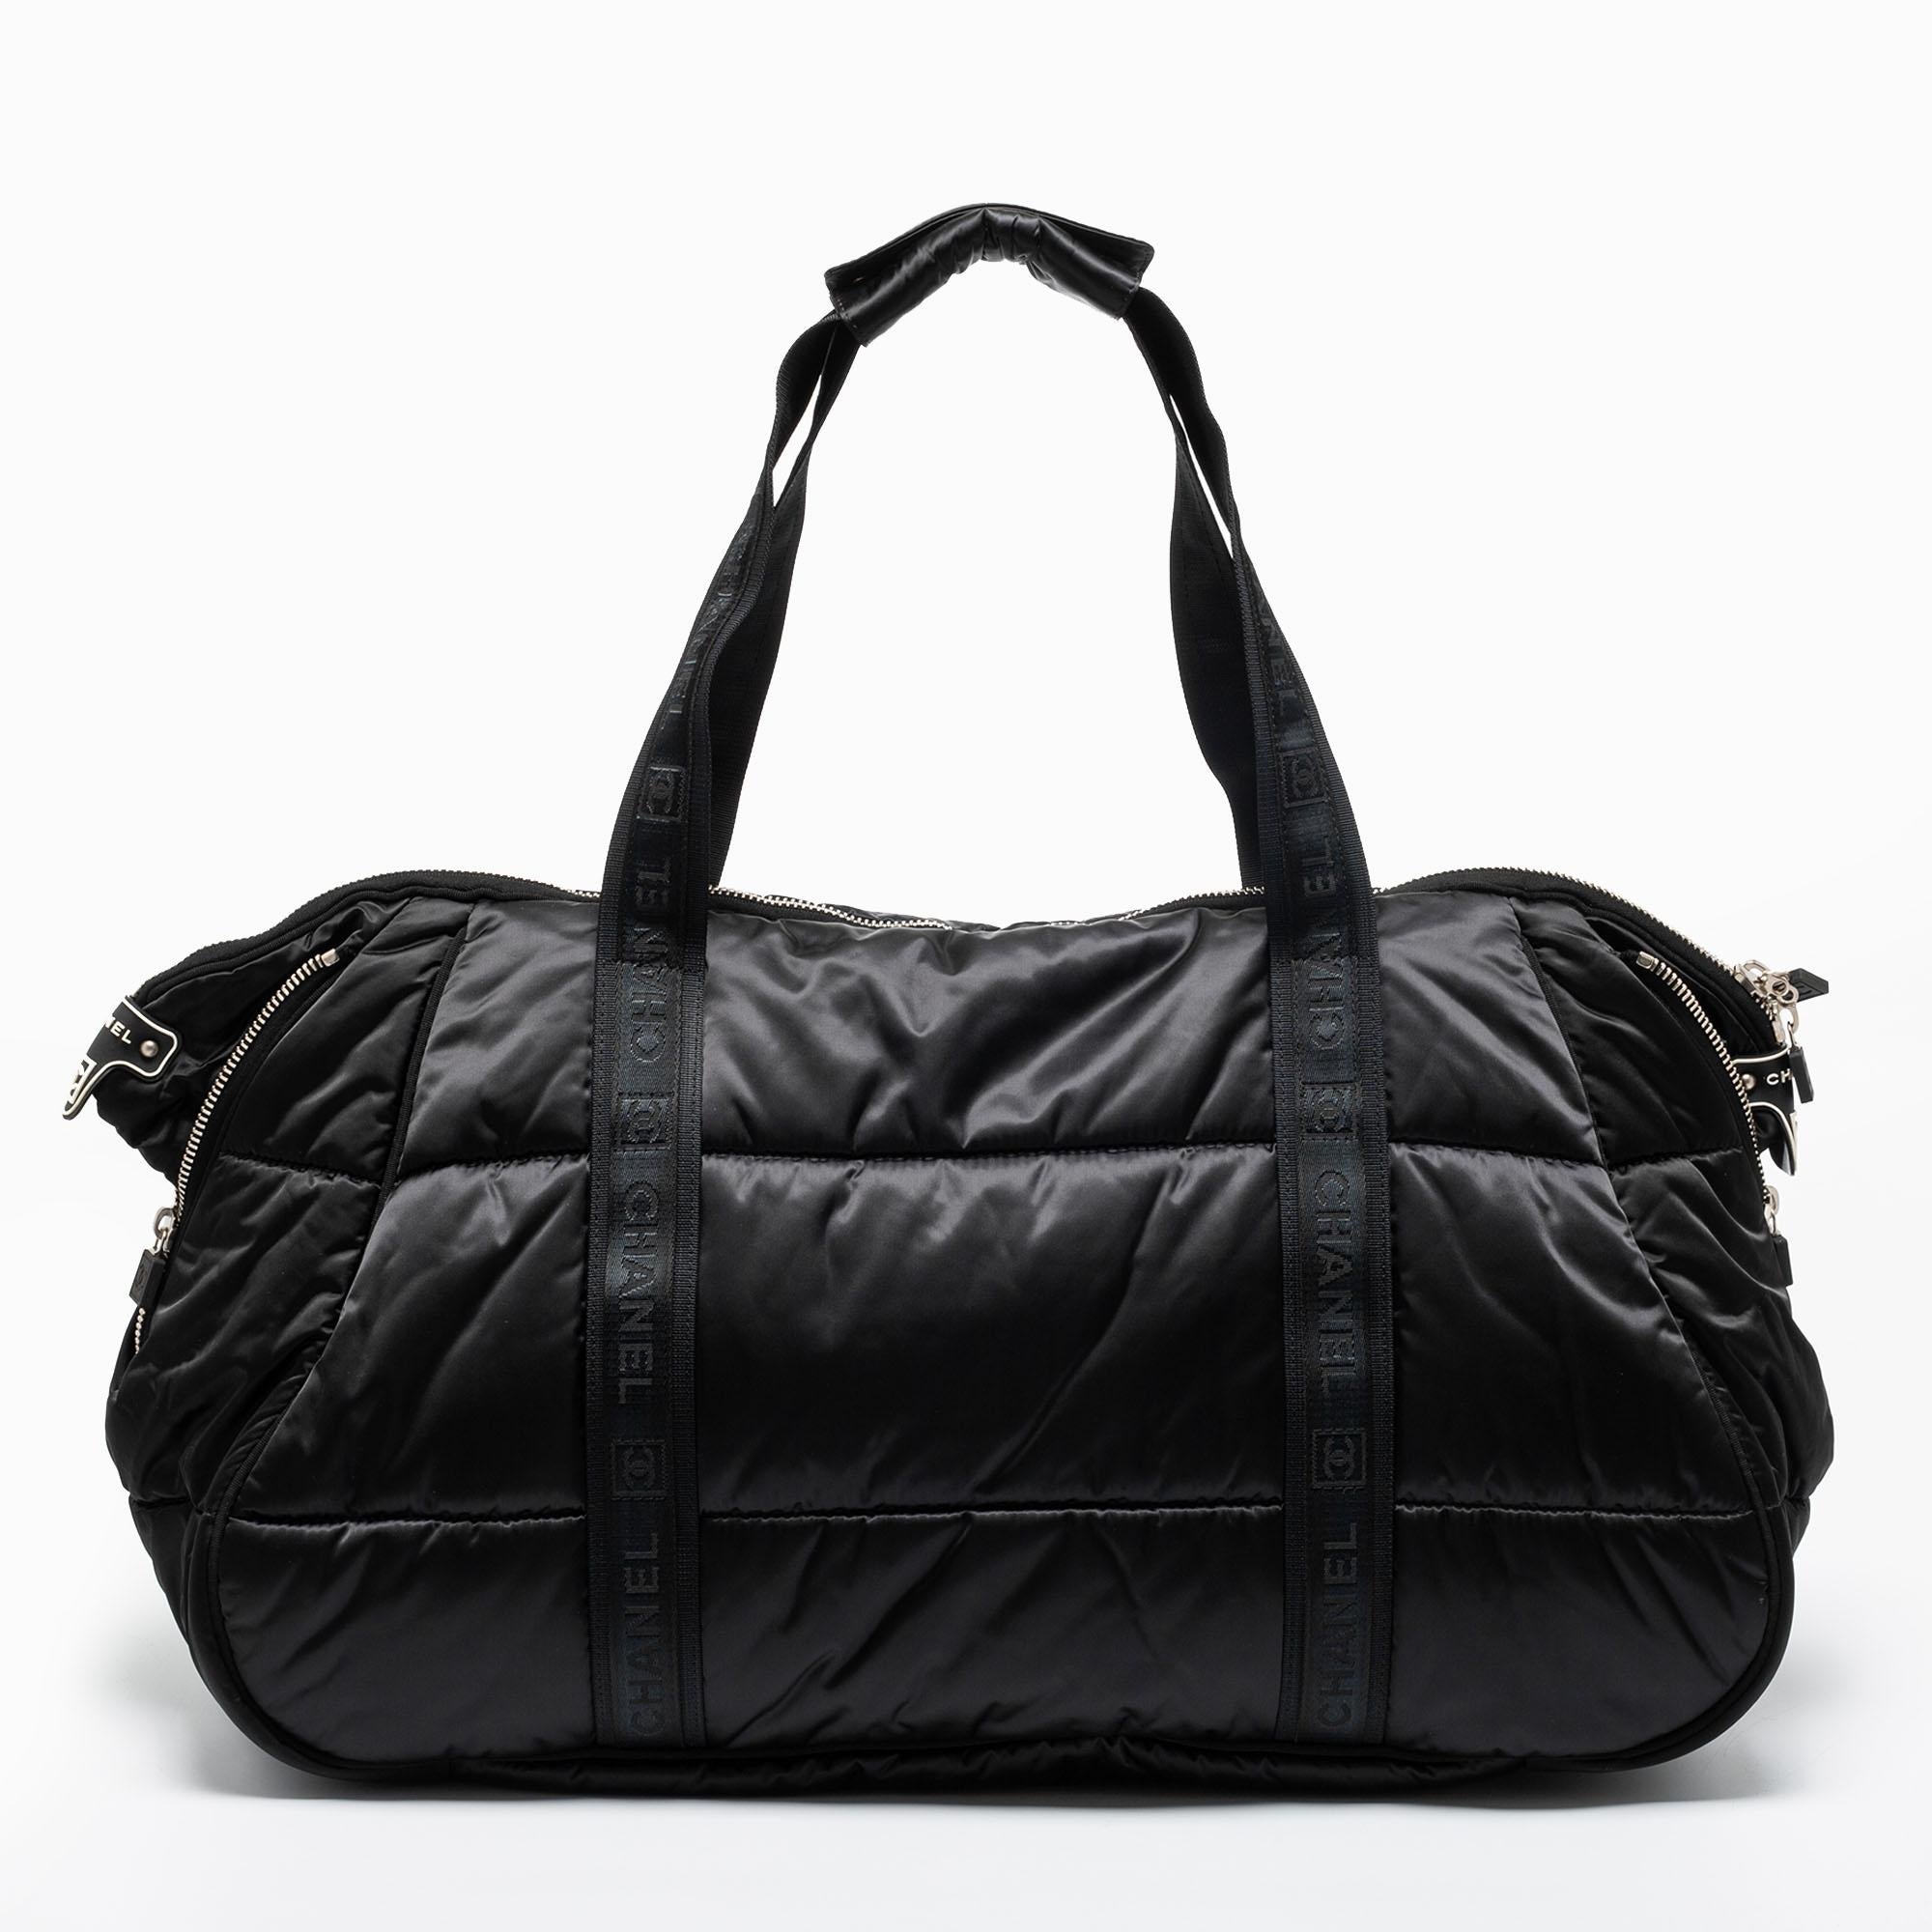 Experience fine craftsmanship with this immaculately designed nylon CC Sport Ligne Duffle bag by Chanel. It has two branded handles, a front CC logo, and a lined interior.

Includes: Original Dustbag, Authenticity Card, Info Booklet